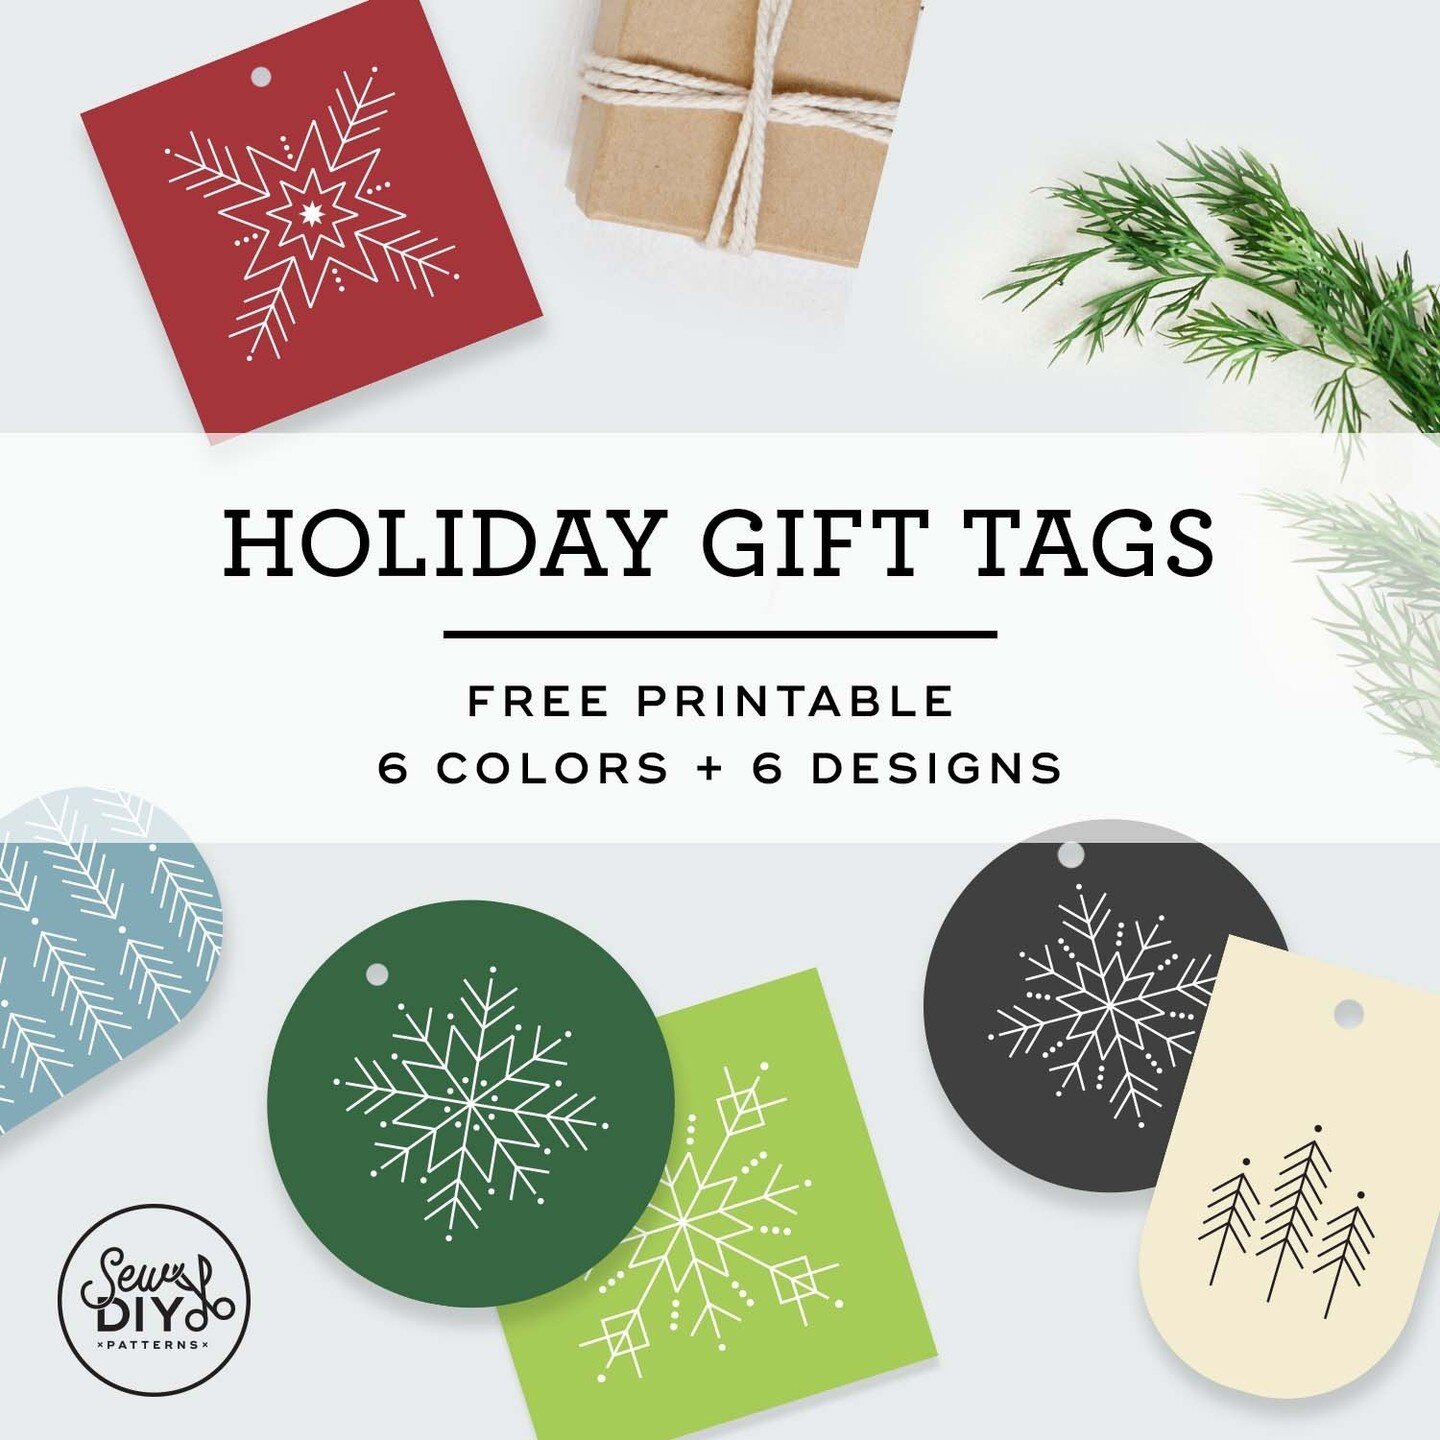 Looking for a touch of homemade charm to add to your gifts this holiday season? We've got you covered! We've got you covered! 🎄✨ Check out our latest blog post to snag your FREE printable holiday gift tags for that extra special finishing touch. ⁠
?